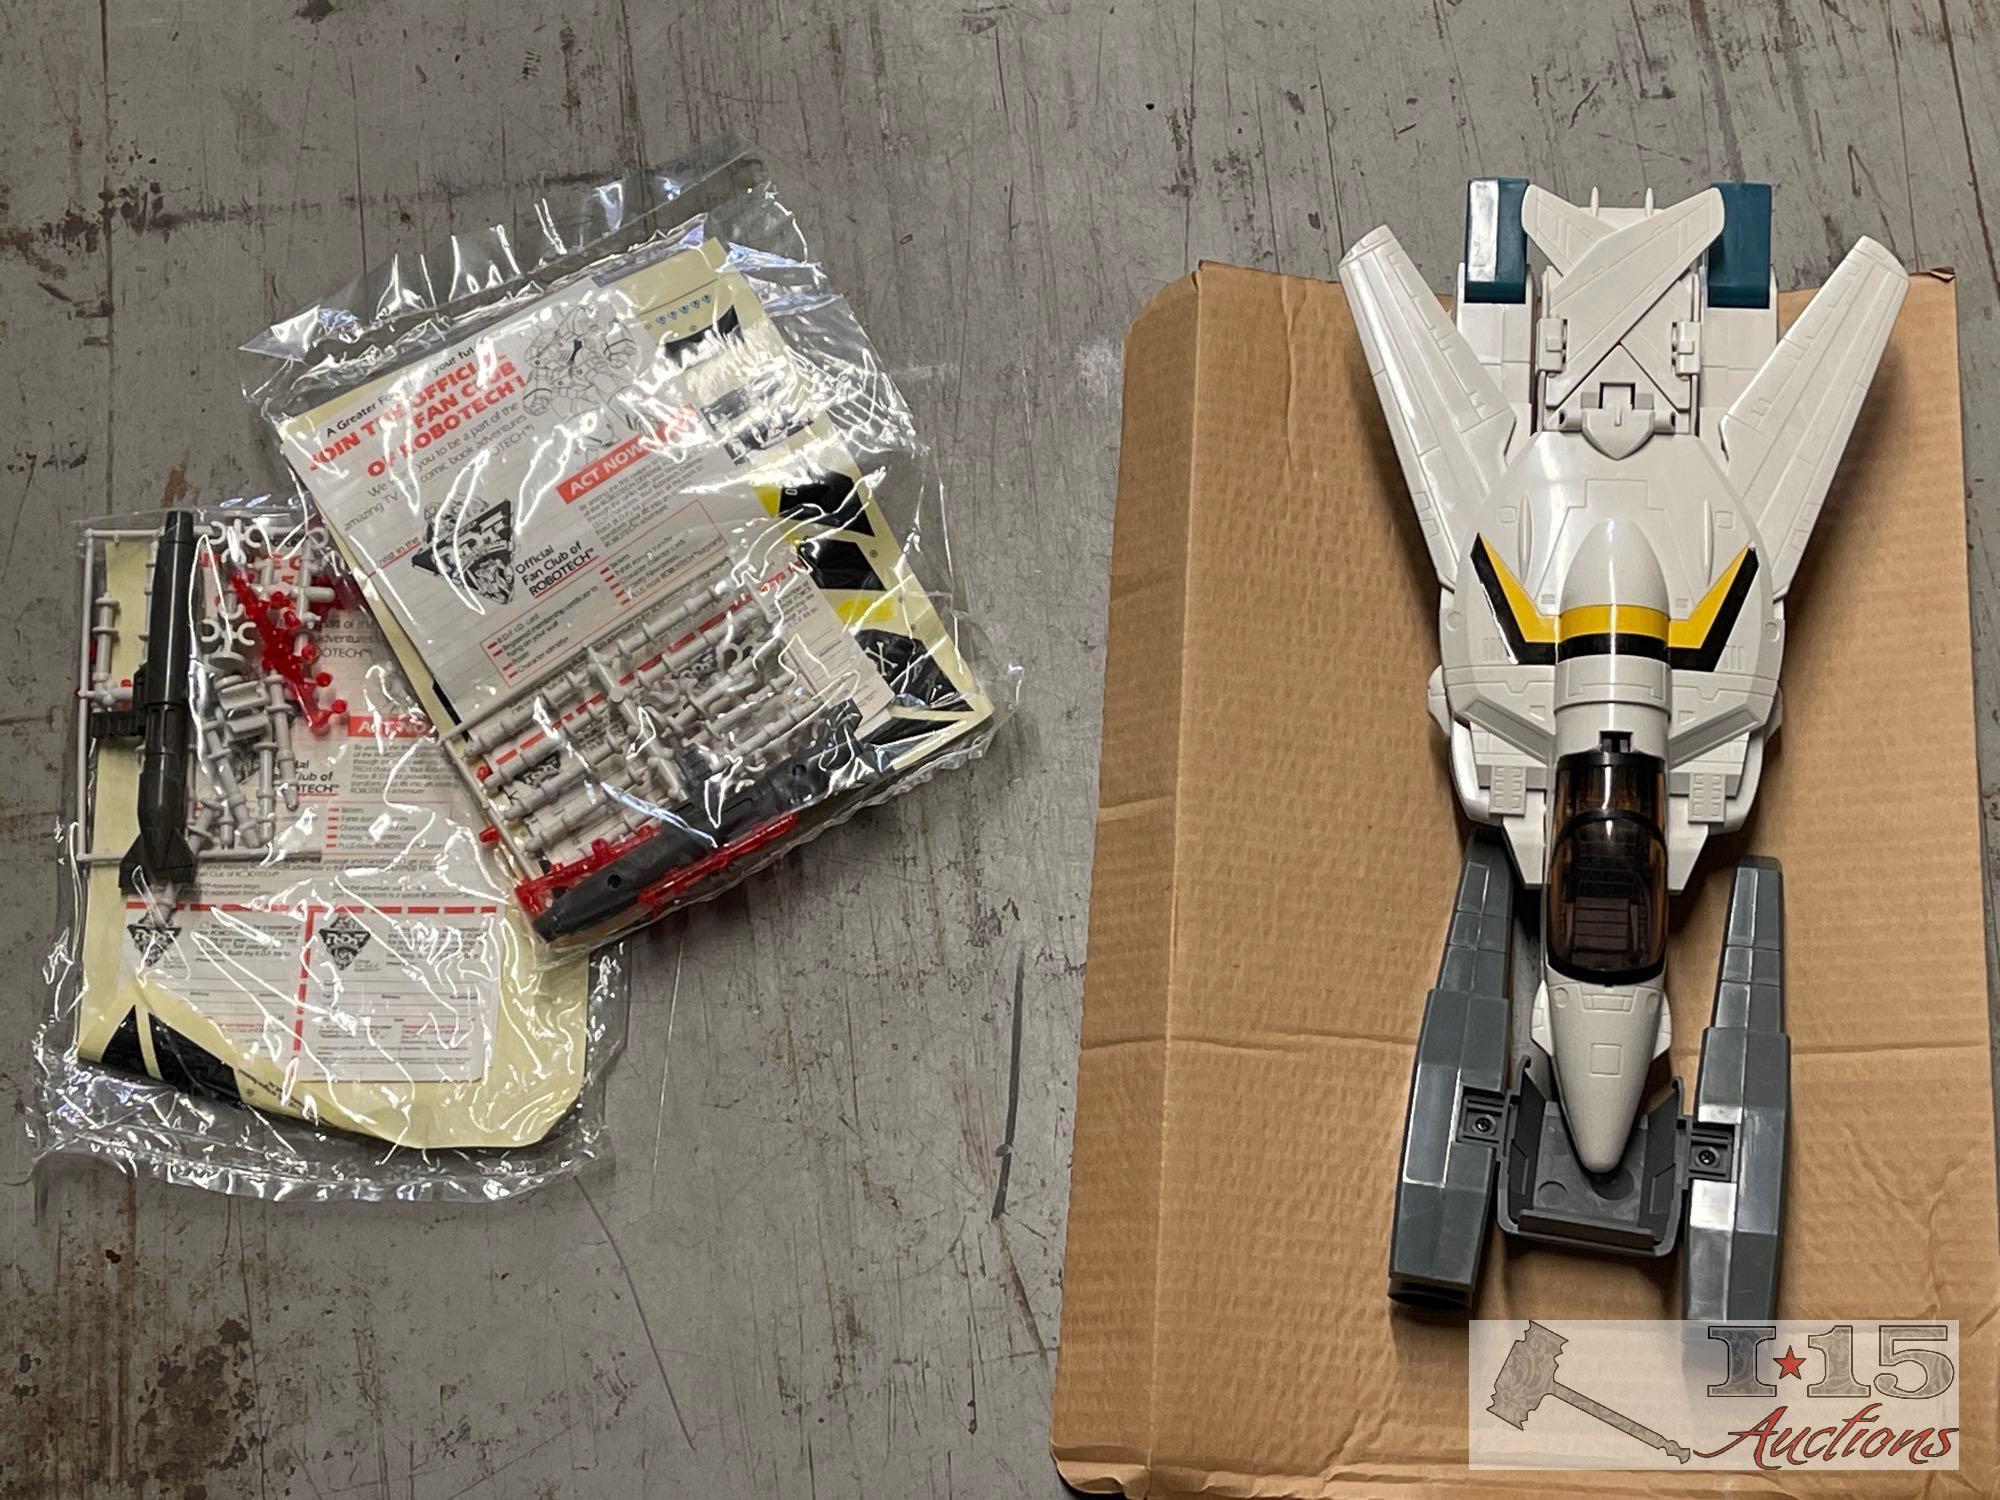 Robotech Figurines and Empty Boxes